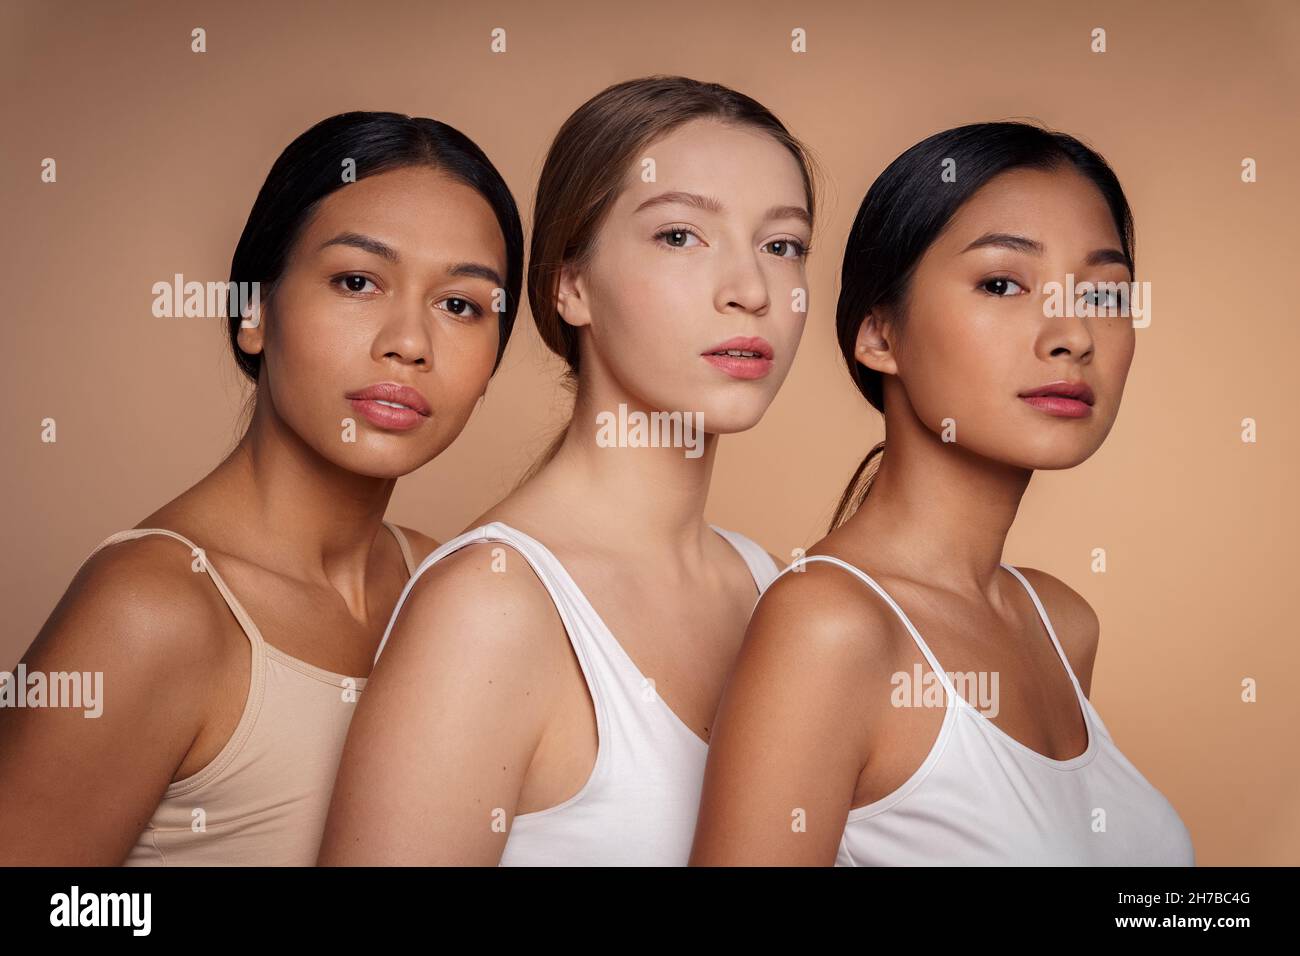 Caucasian, african-american and asian young women posing together for camera Stock Photo